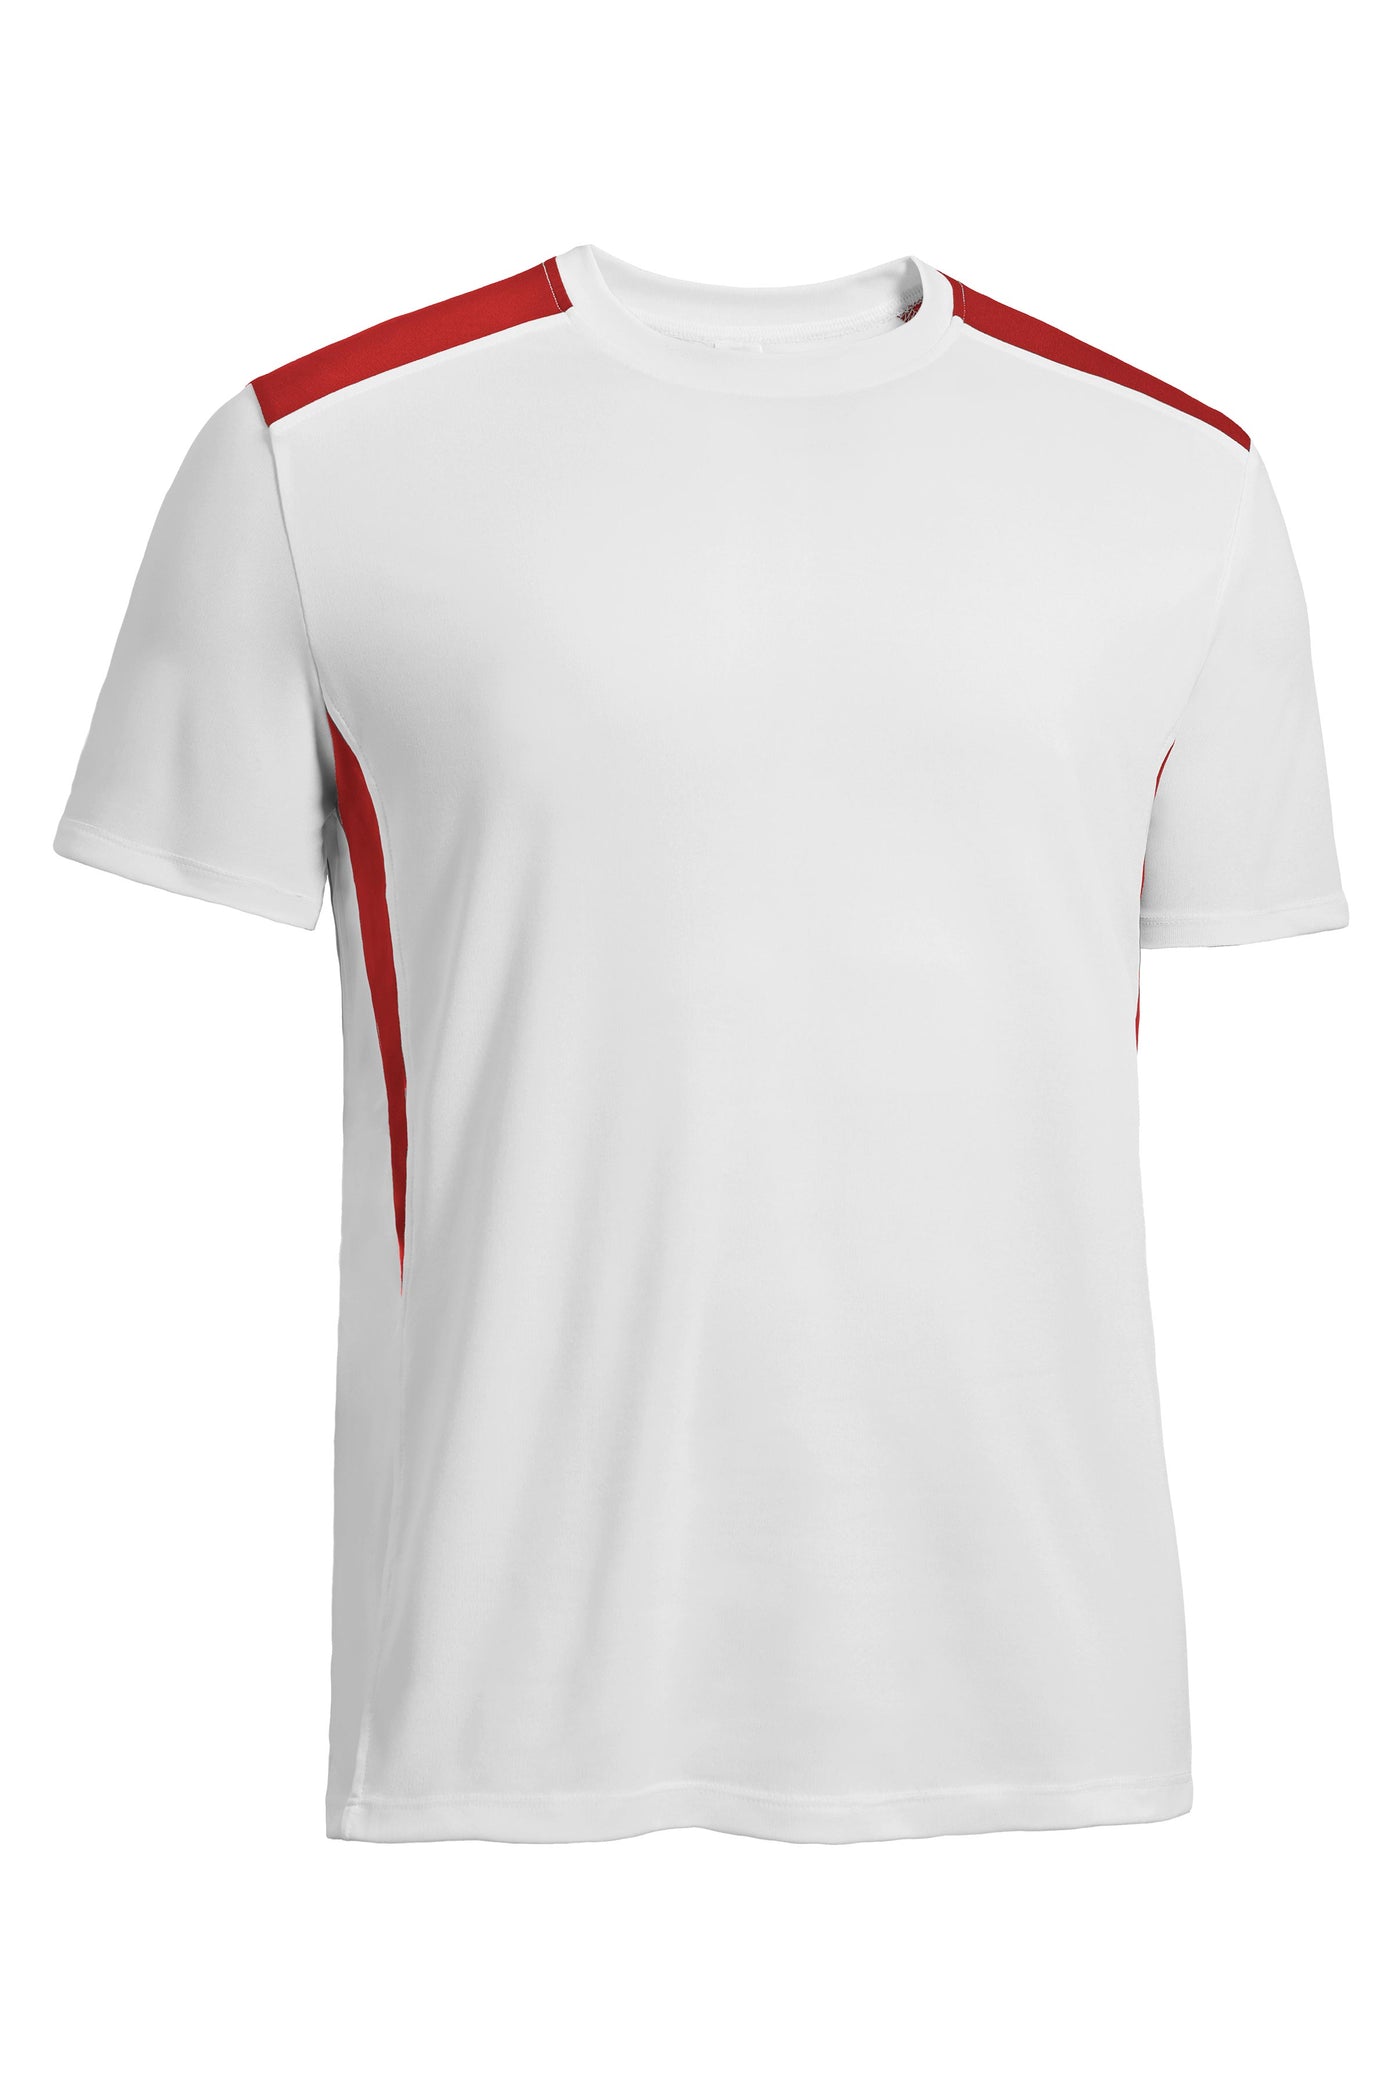 DriMax™ Stadium Tee 🇺🇸 - Expert Brand Apparel#color_white-red